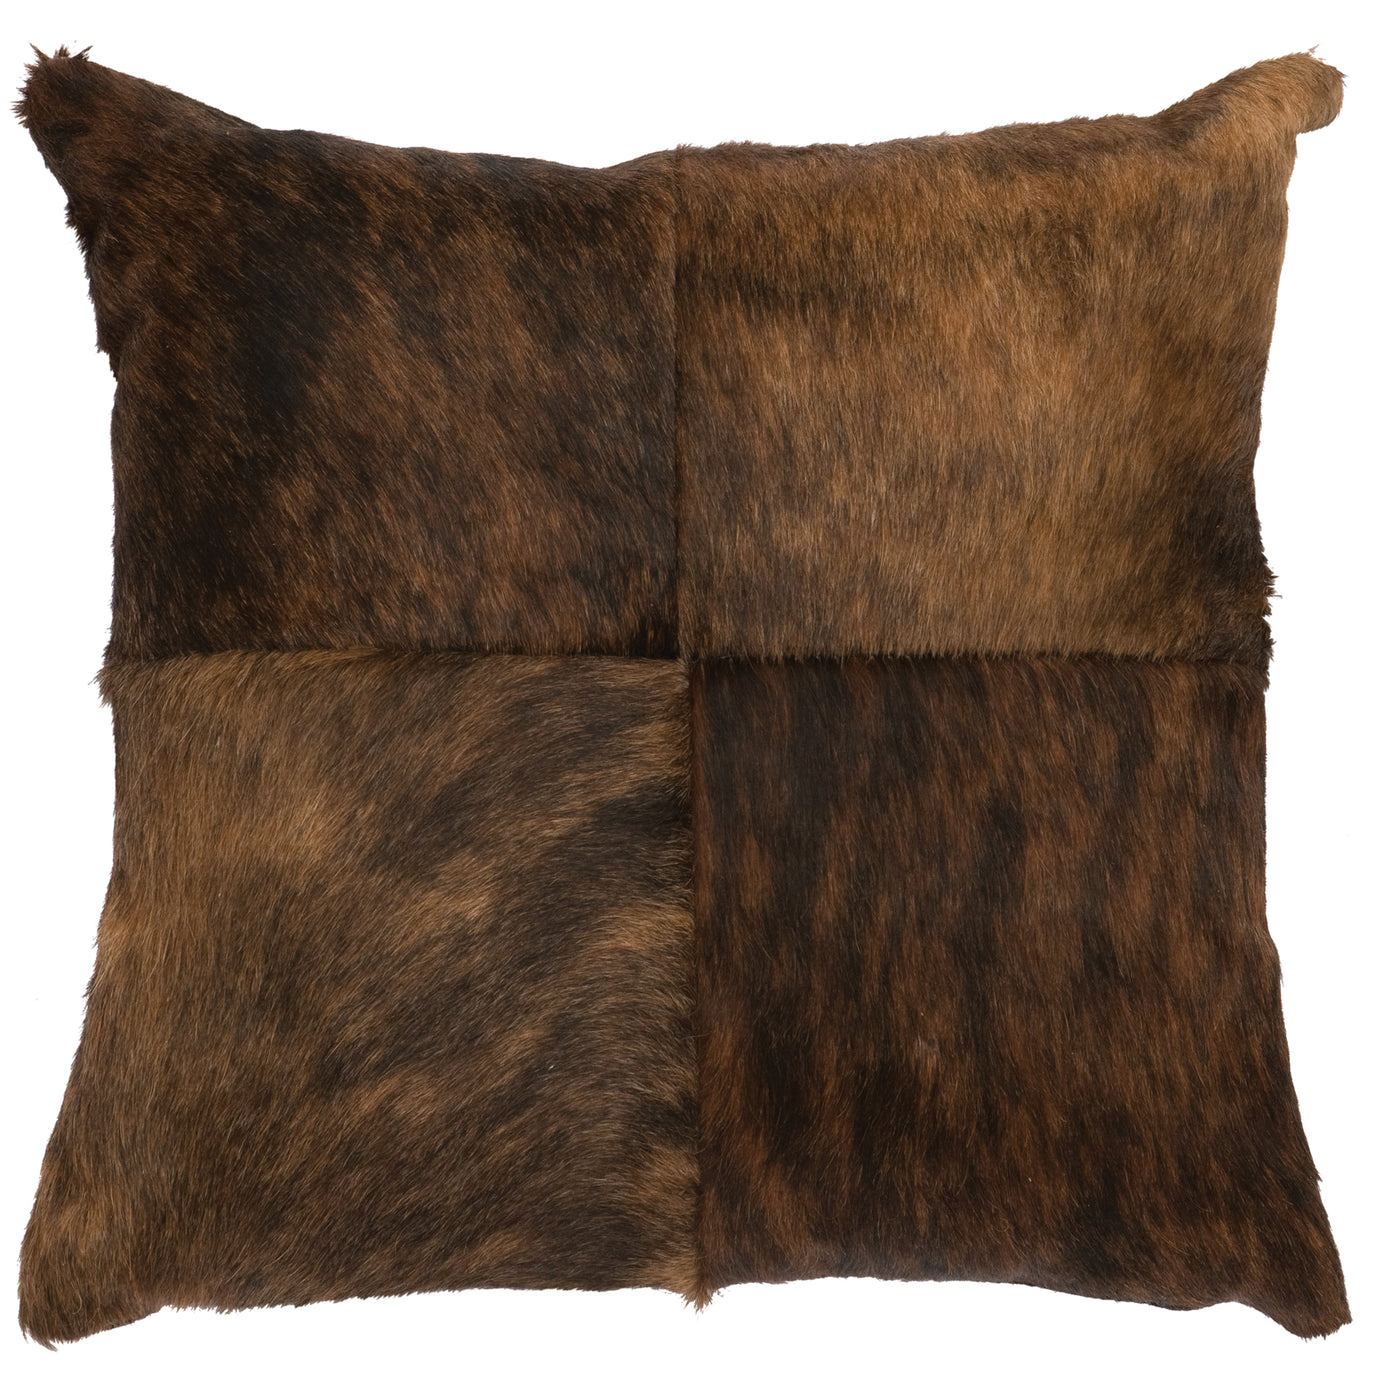 Canvello Dark Brindle Leather Pillow - Fabric Back - 16" x 16"